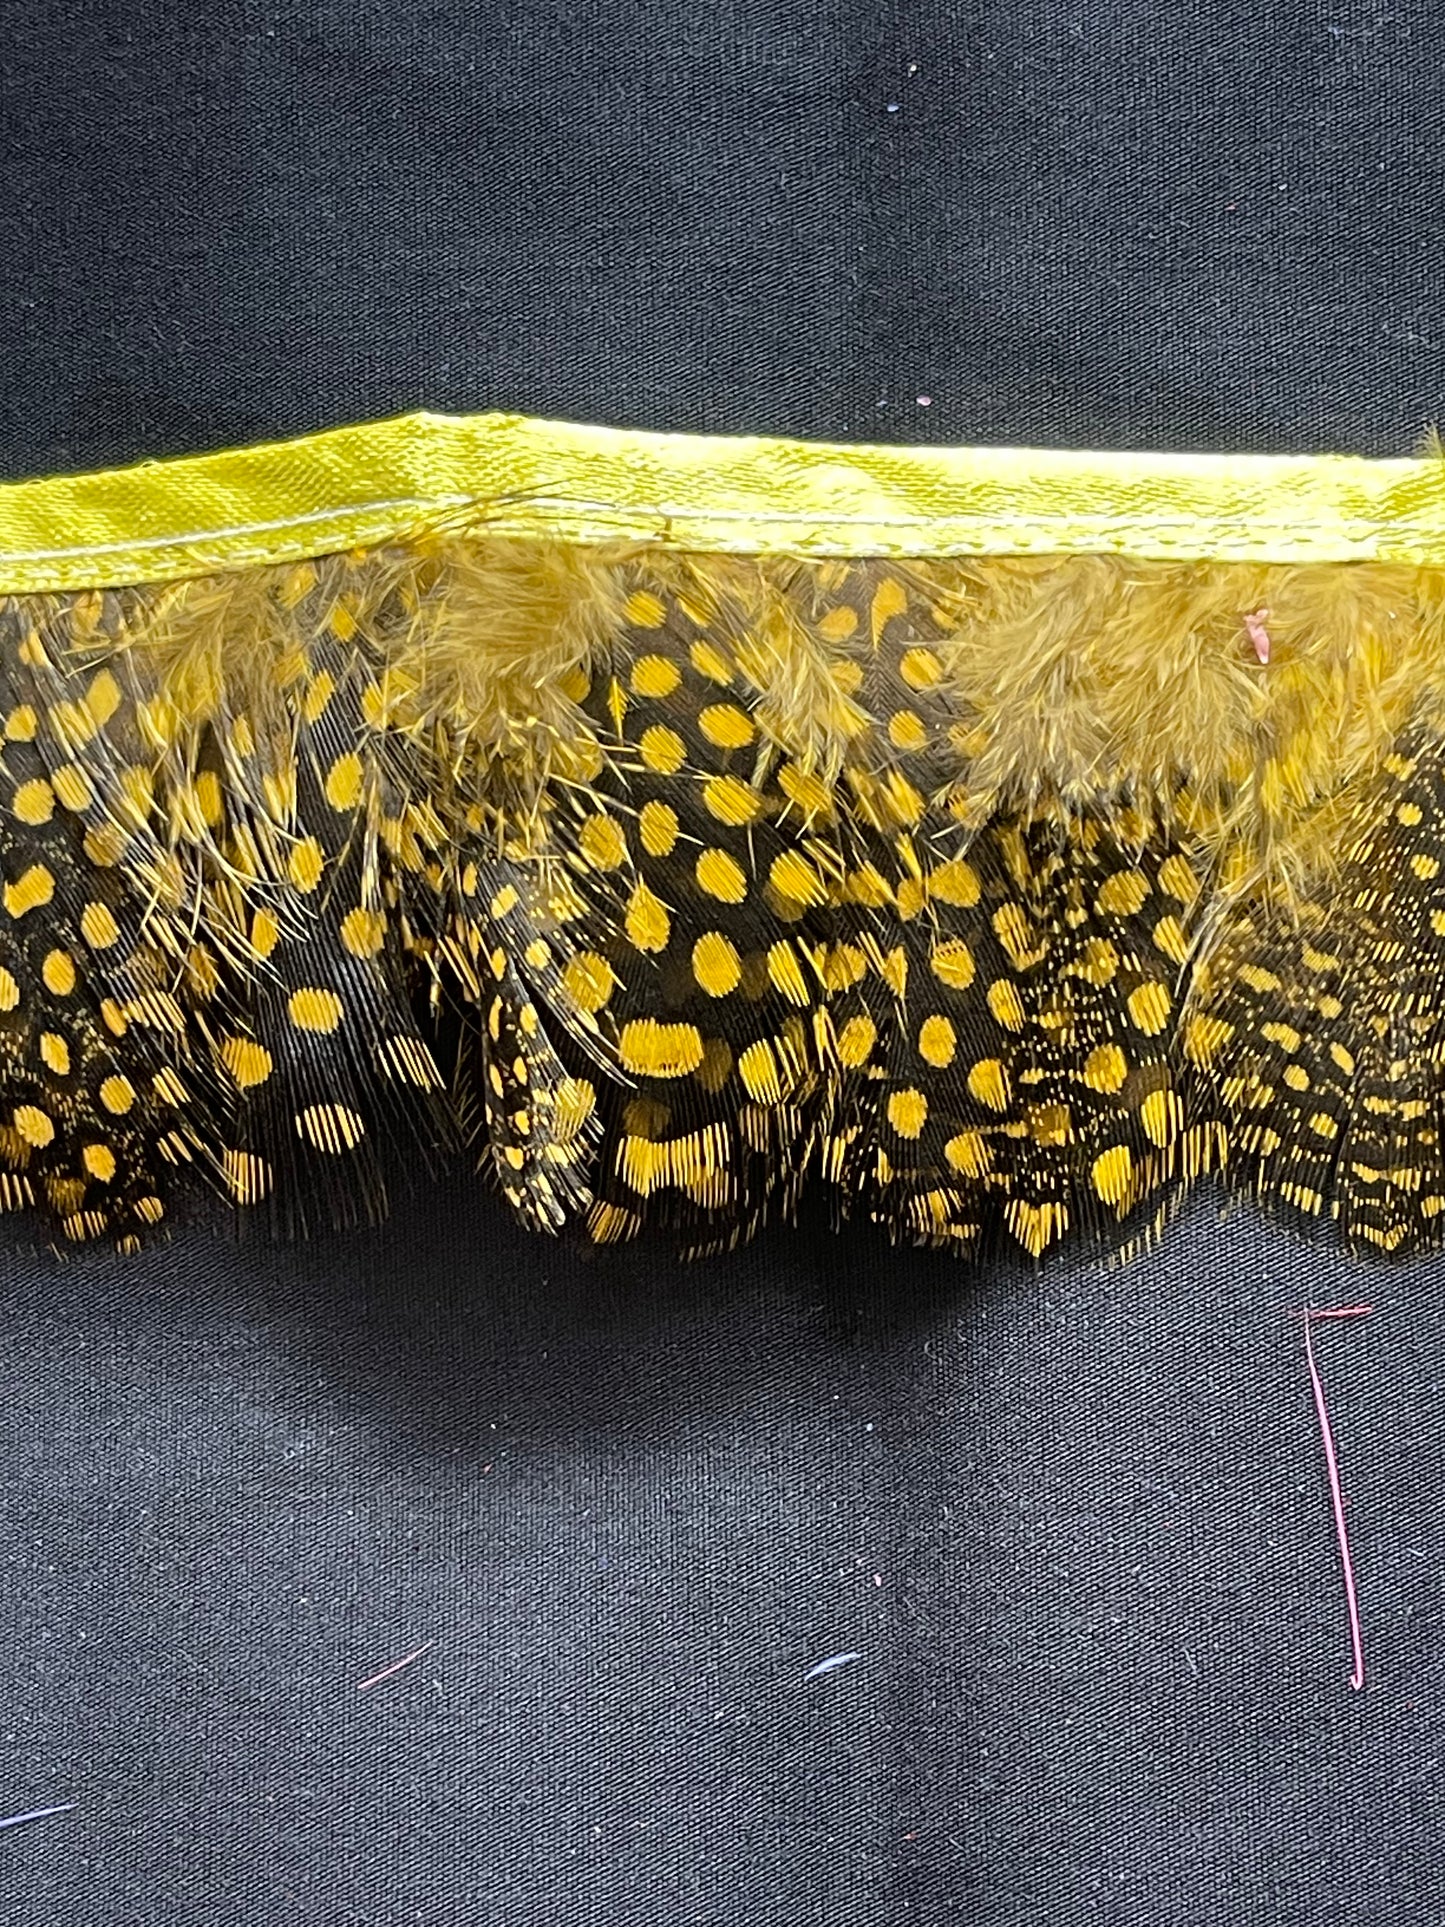 Gold Spotted Guinea Fowl Feathers